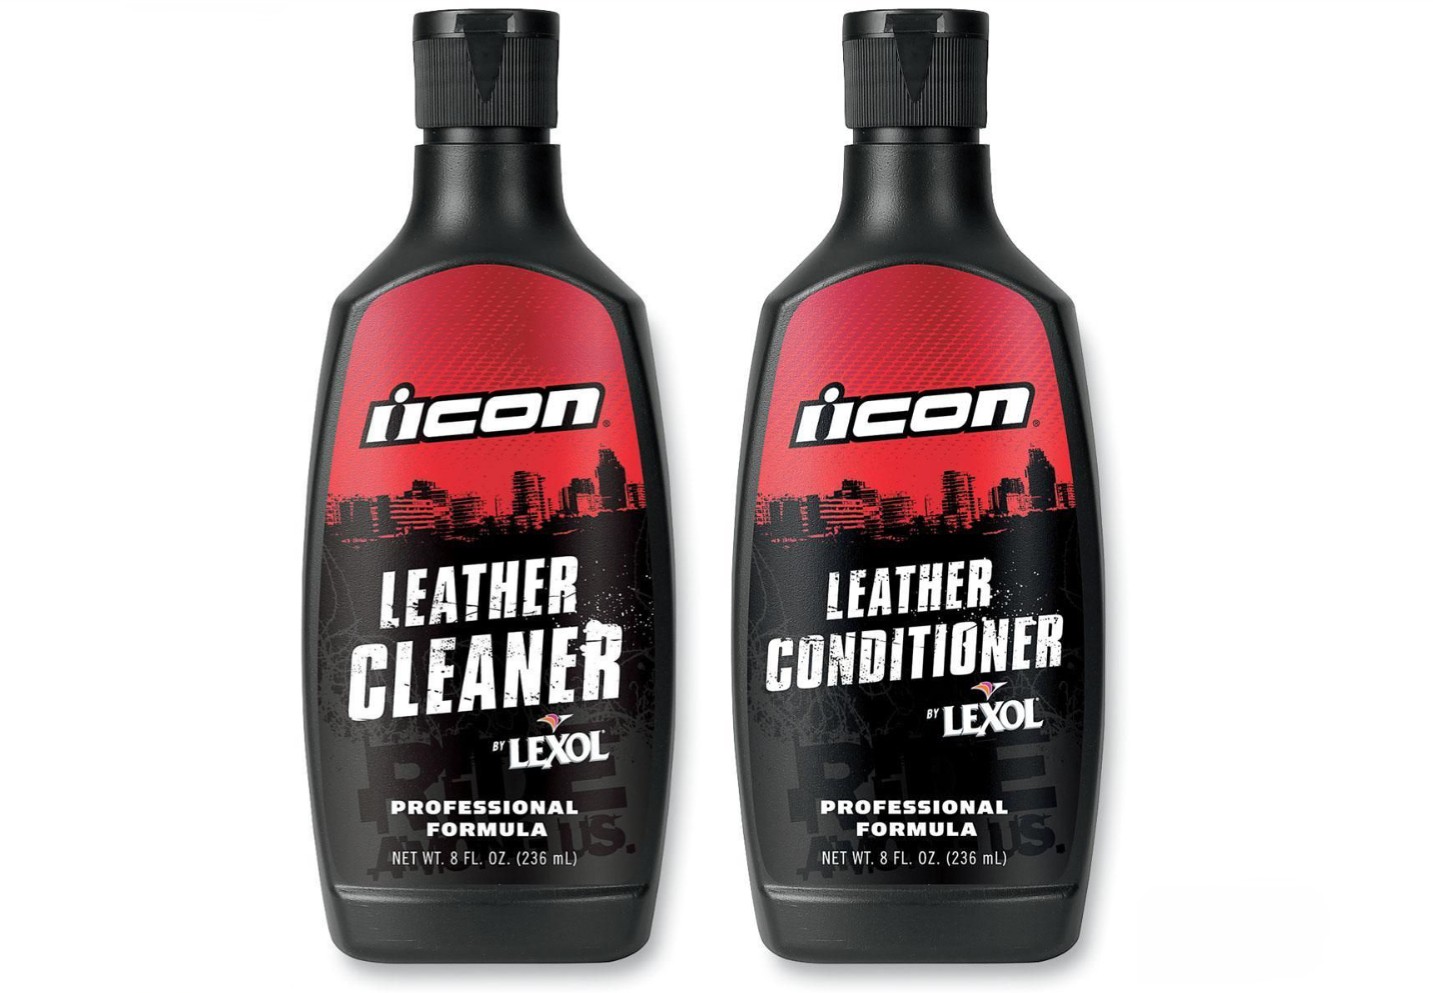 Leather riding gear cleaner and conditioner